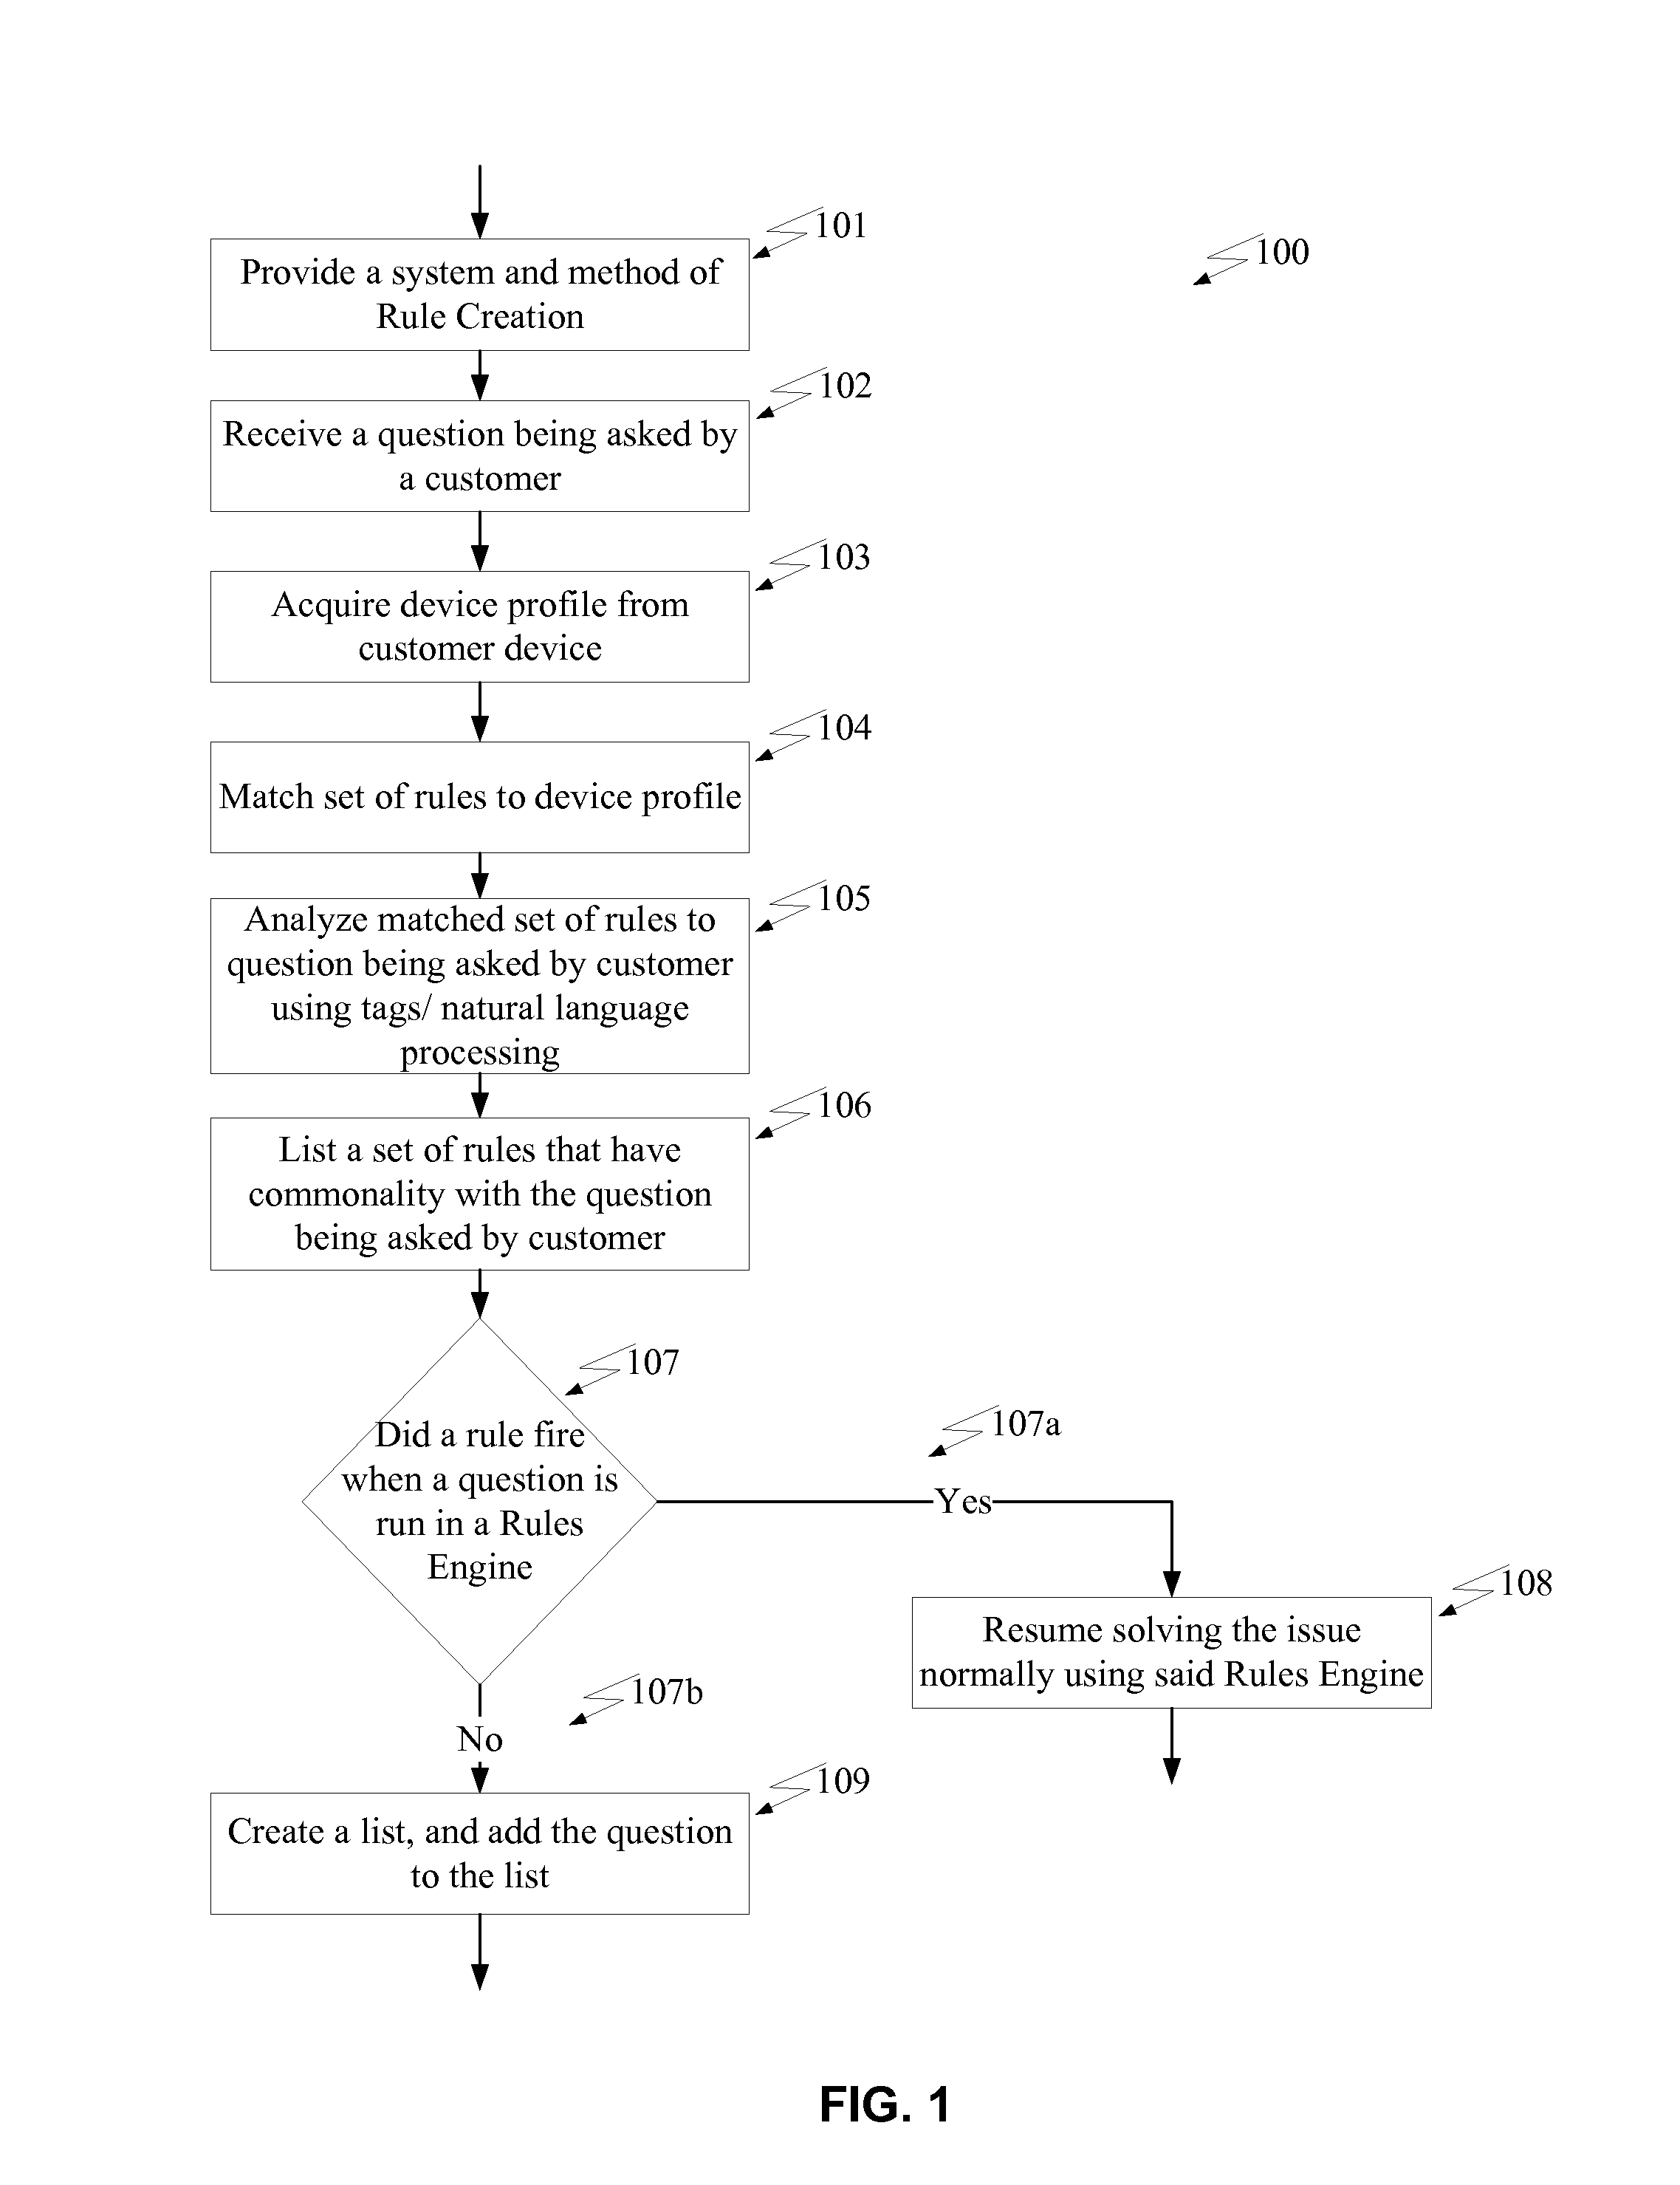 System and method of rule creation based on frequency of question